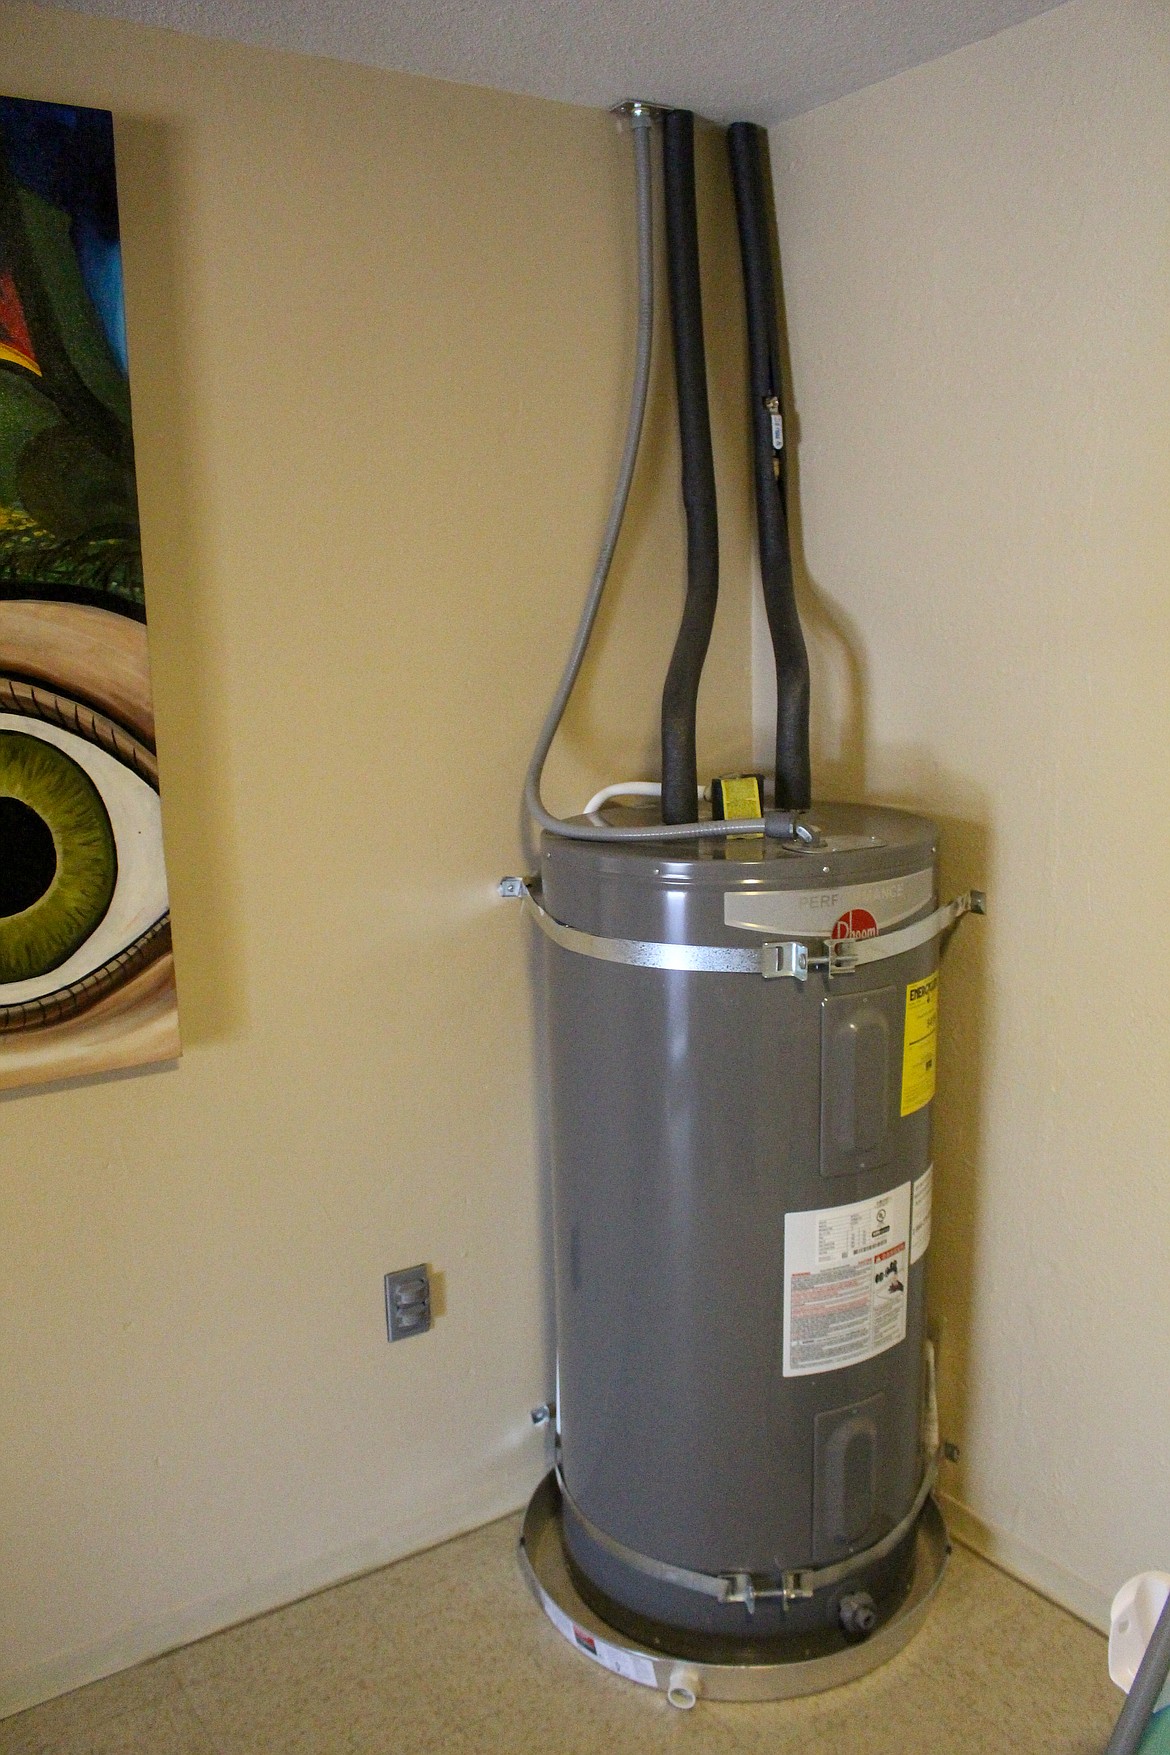 Ensuring all of the wiring and piping around a water heater is in proper working order is just one item to keep up with to prevent bigger issues.